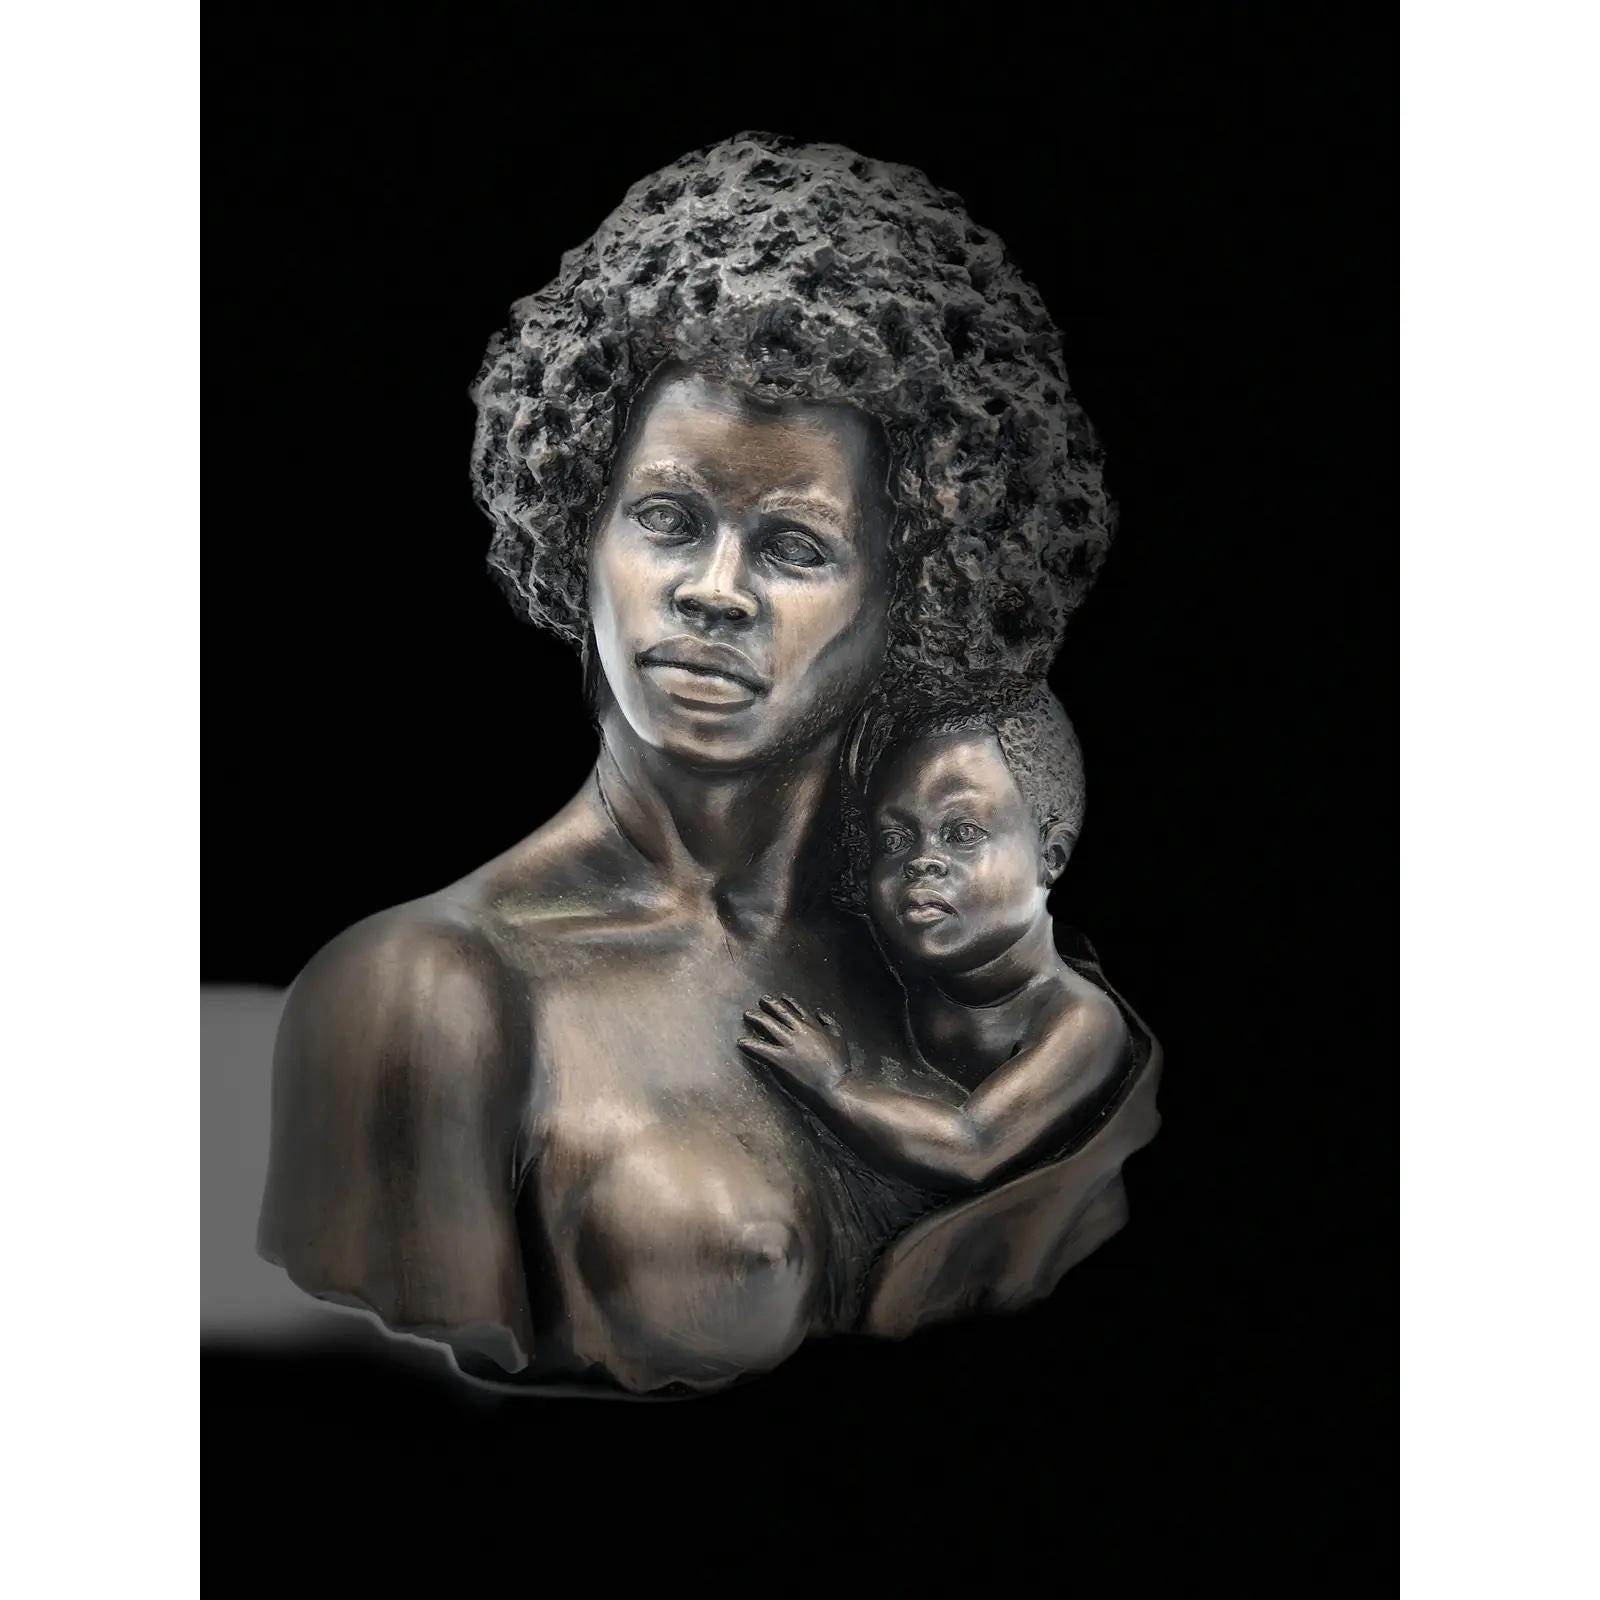 Beautiful depiction of Mother and Child. Signed V. Kendrick 1974 for Universal Statuary Corp. Chicago. Home photo is the true color.